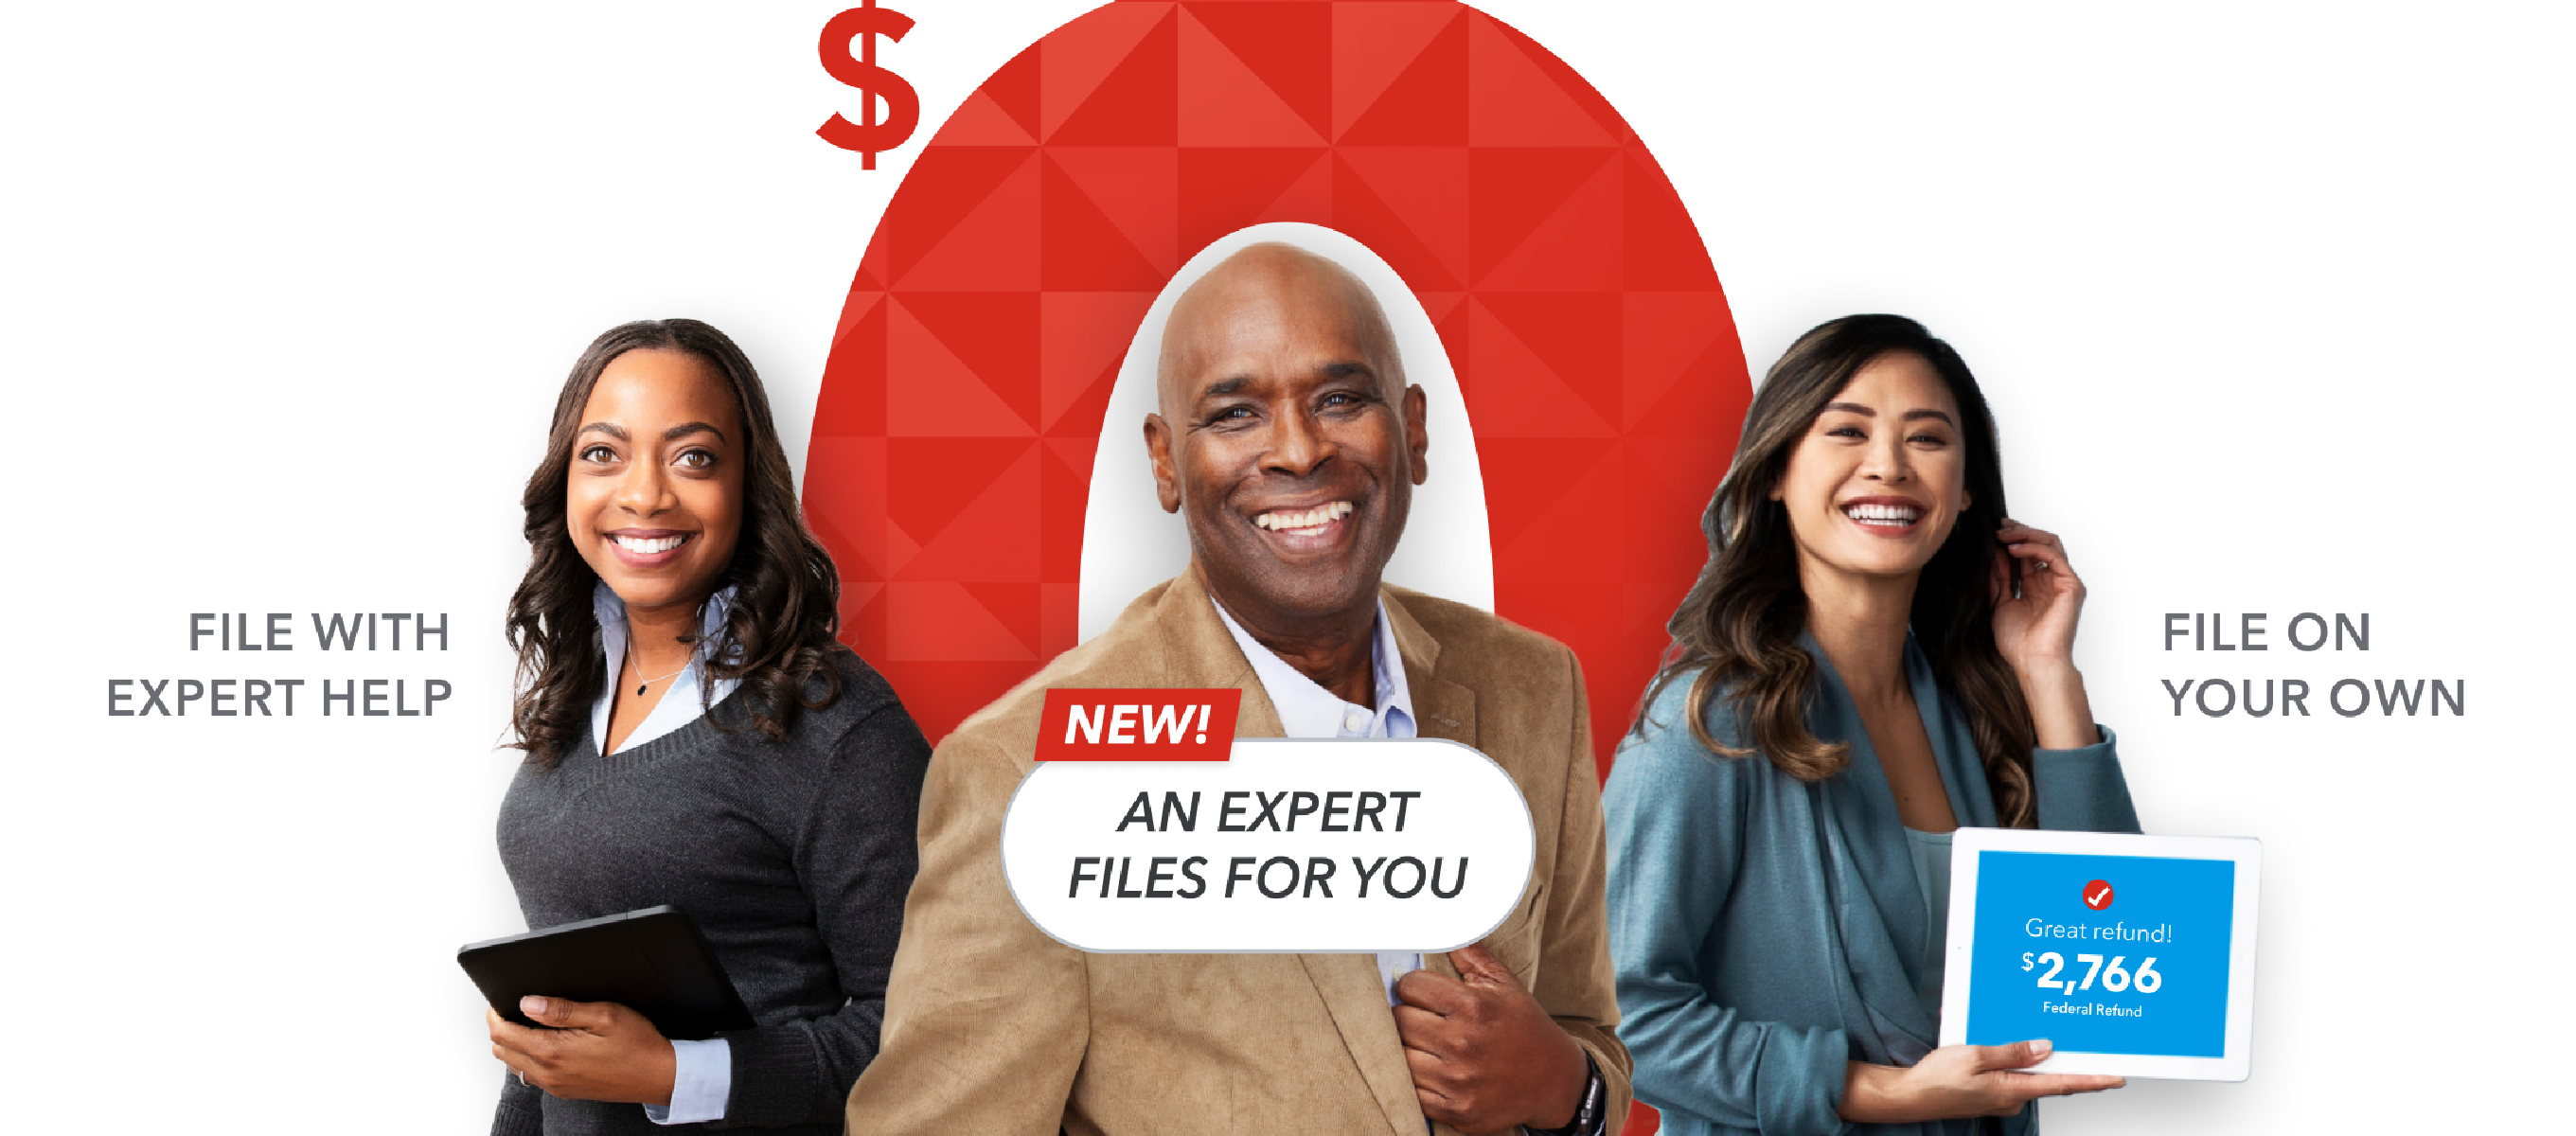 File Your Simple Tax Return for $0 Any Way